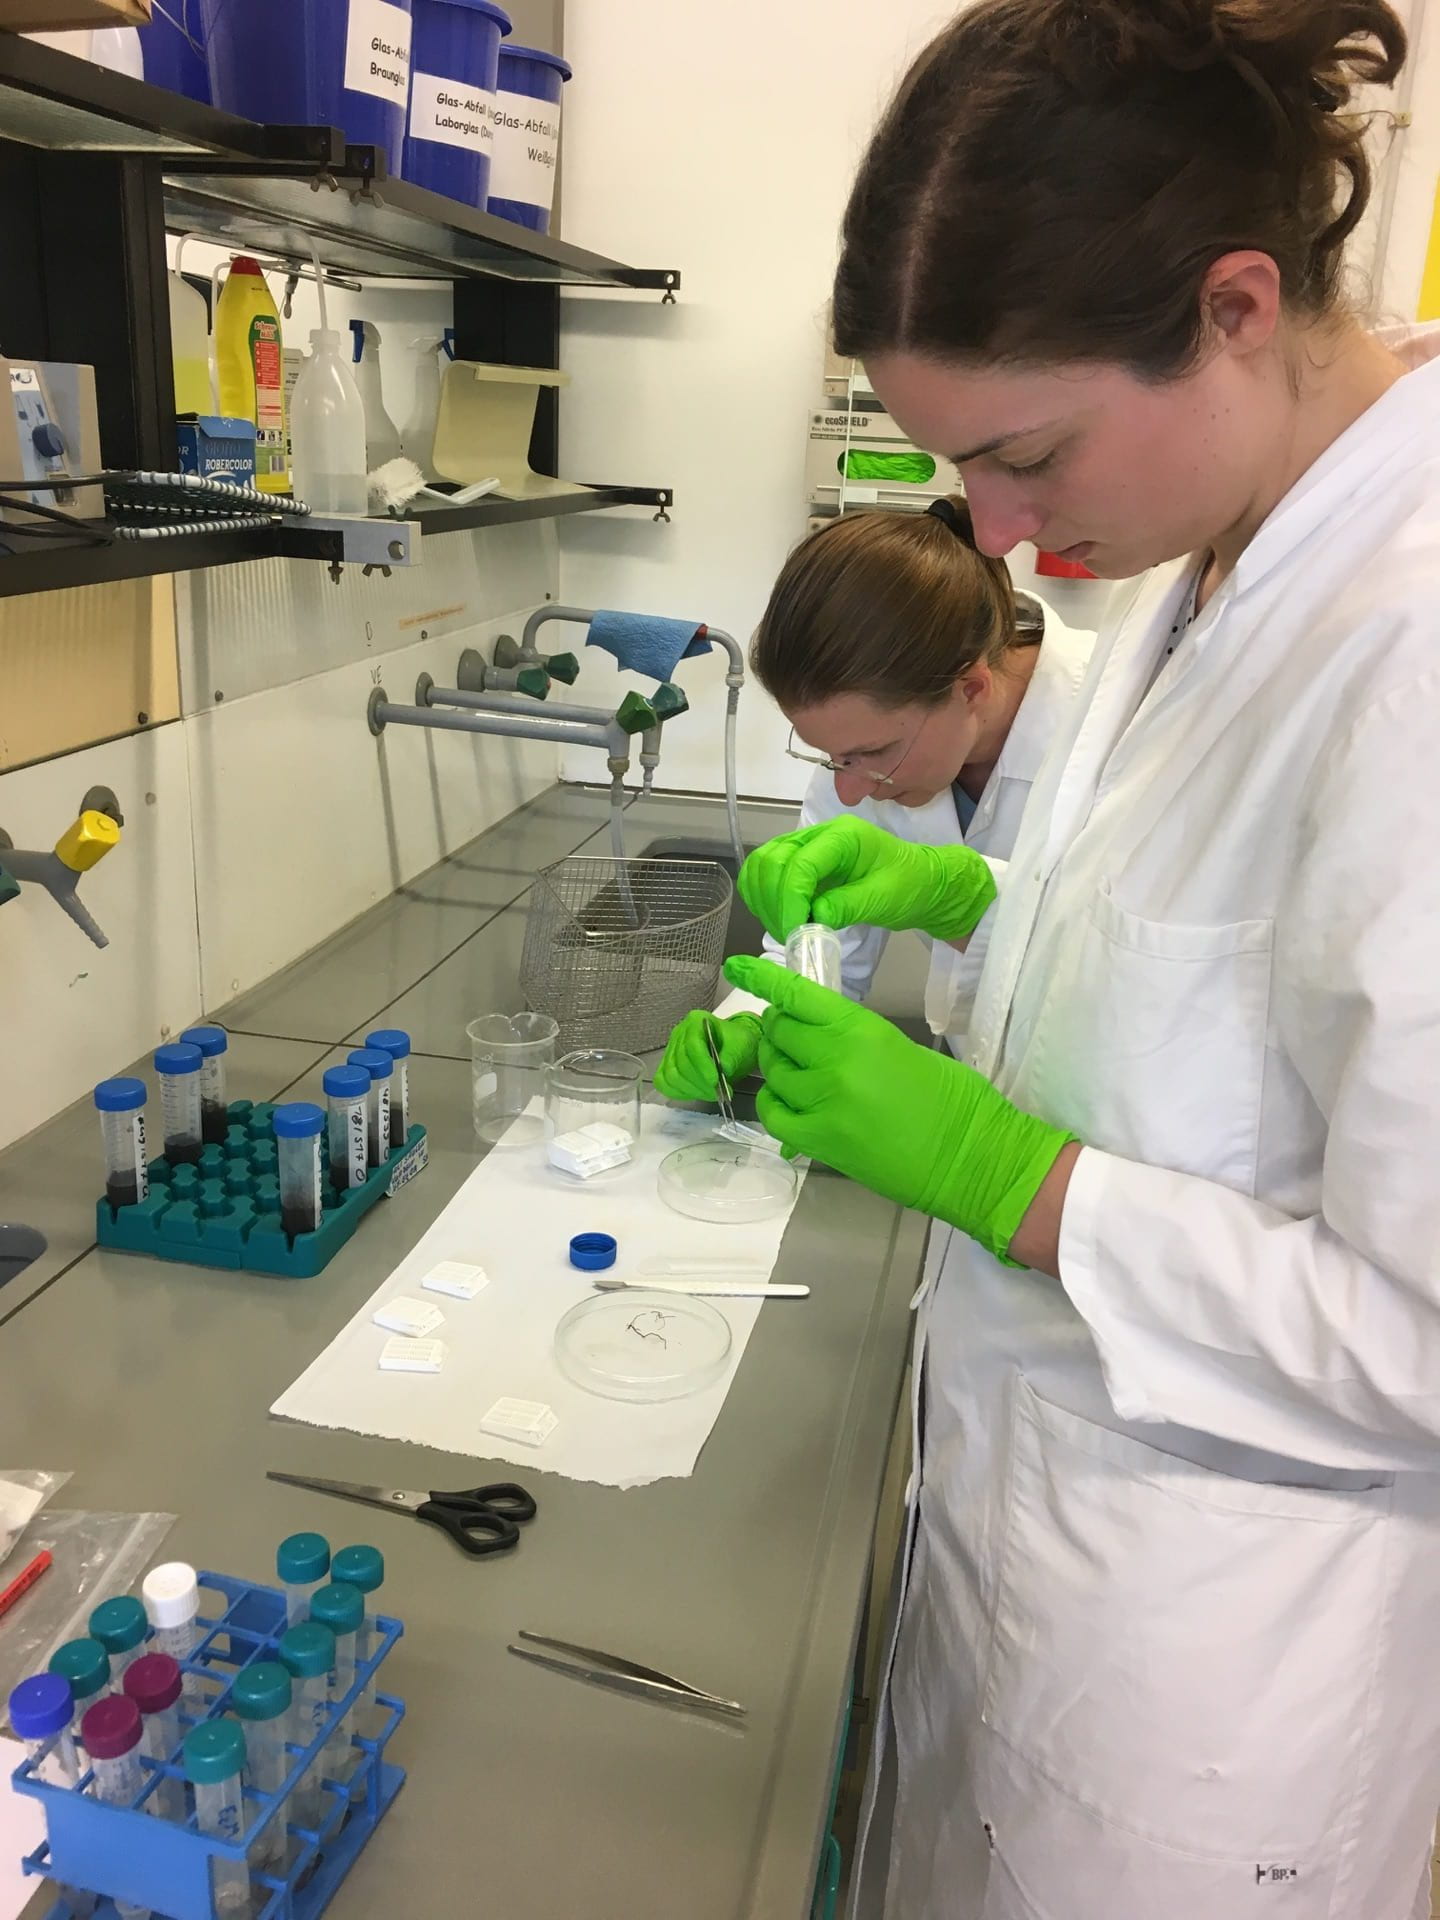 Two scientists working at the lab bench, preparing fungal tissues for staining.